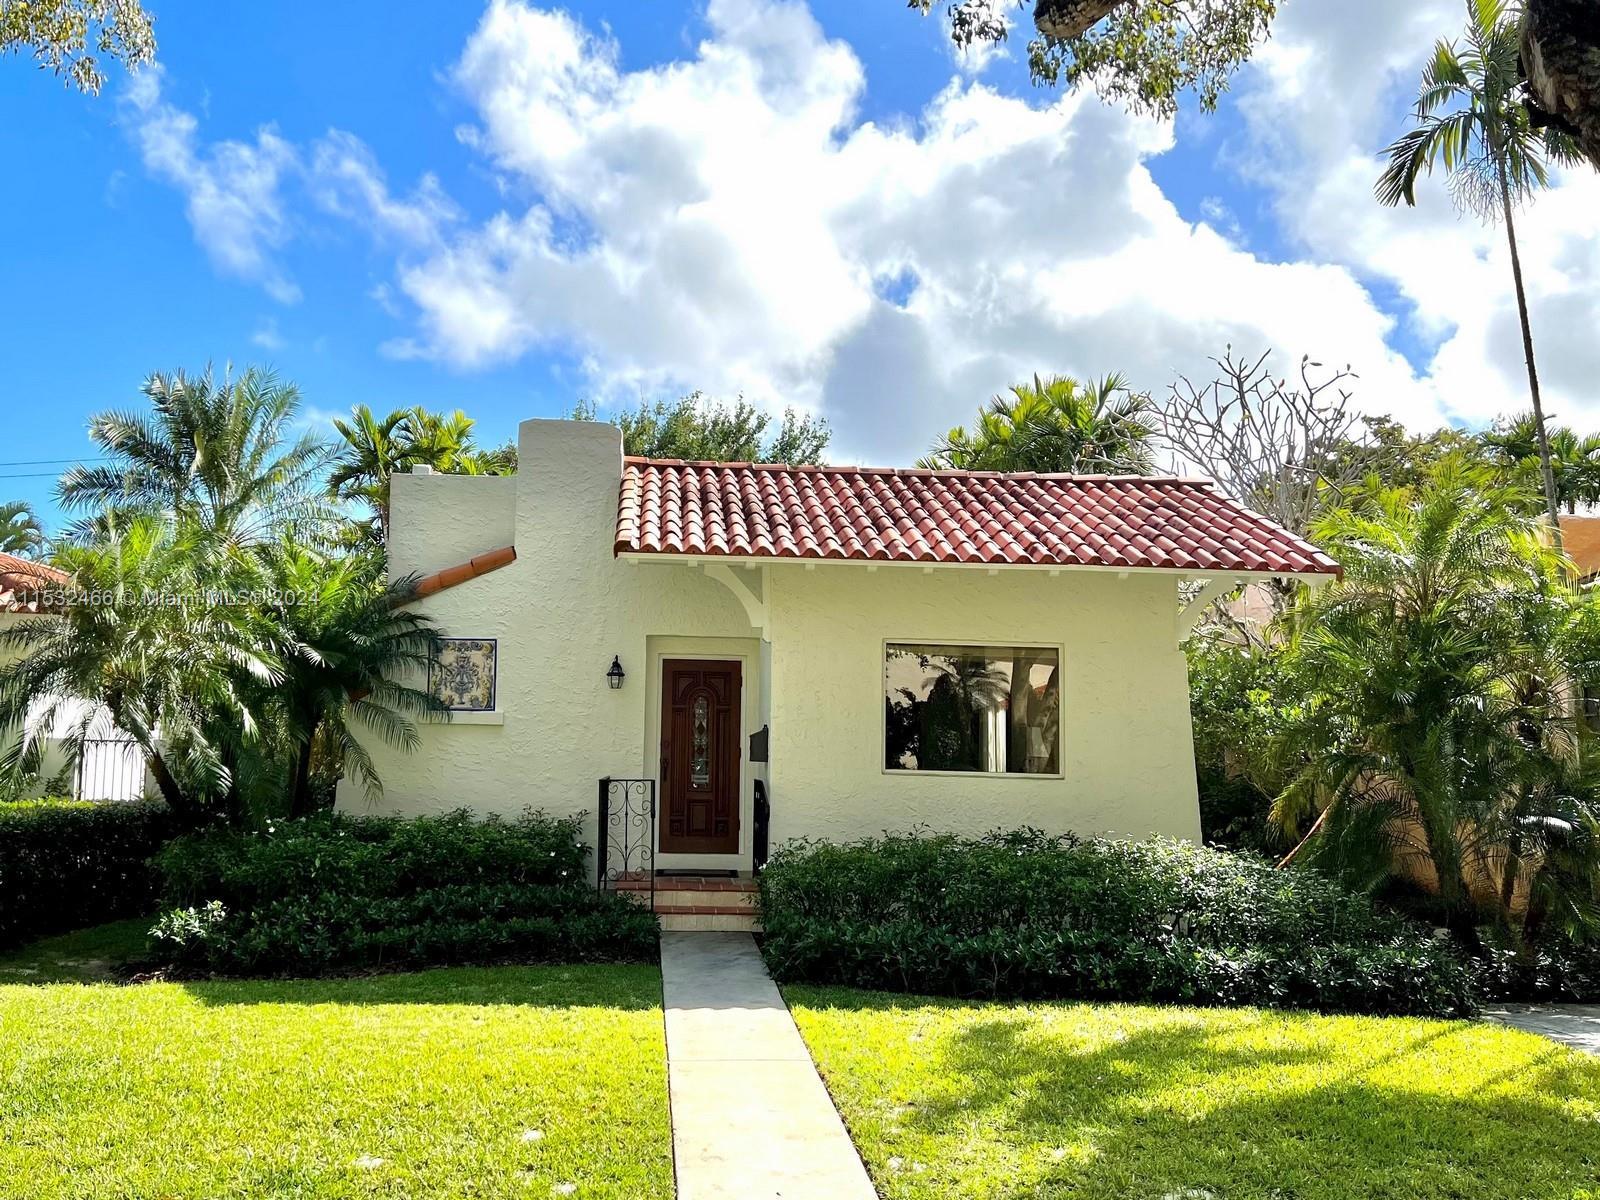 Photo of 1132 Castile Ave in Coral Gables, FL